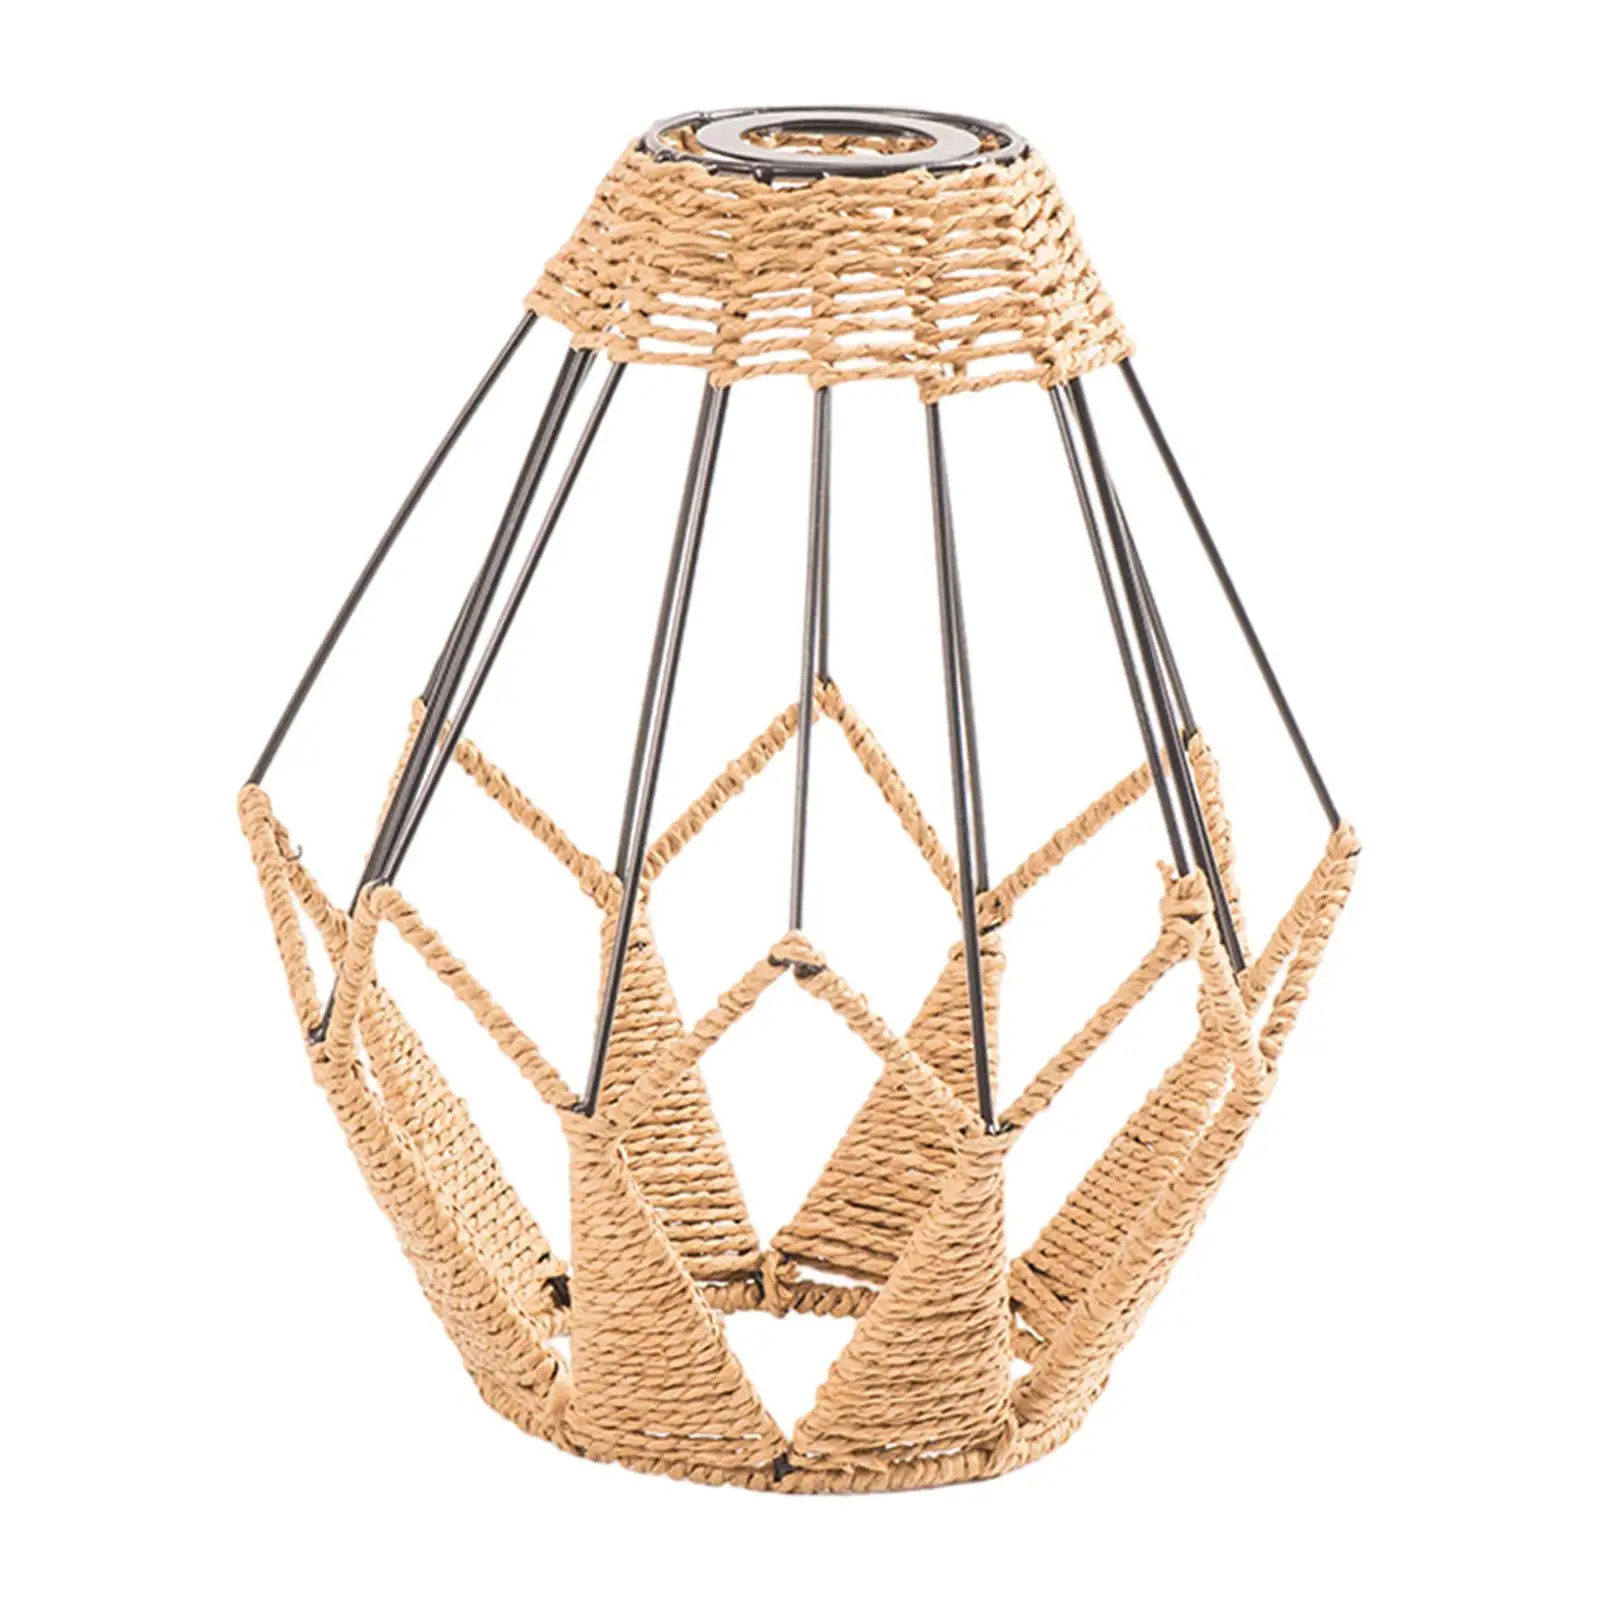 Light Shade Chandelier Cover Decoration Rustic Weave Rope Lampshade for Restaurant Hallway Kitchen Island Dining Room Farmhouse